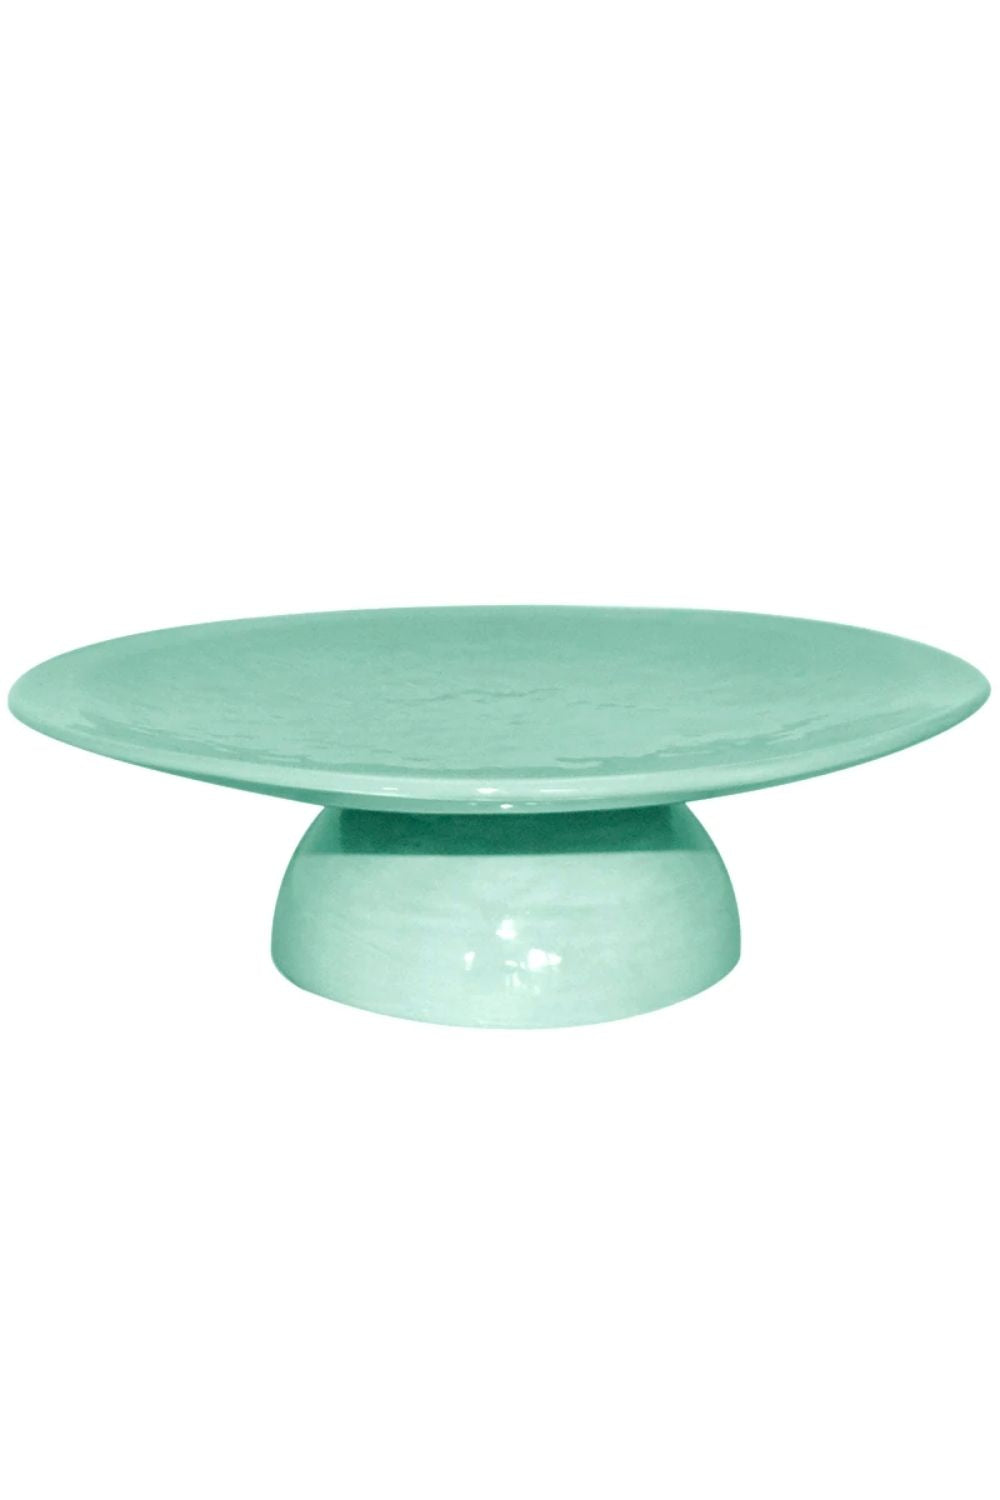 CAKE STAND - GHOST GUM